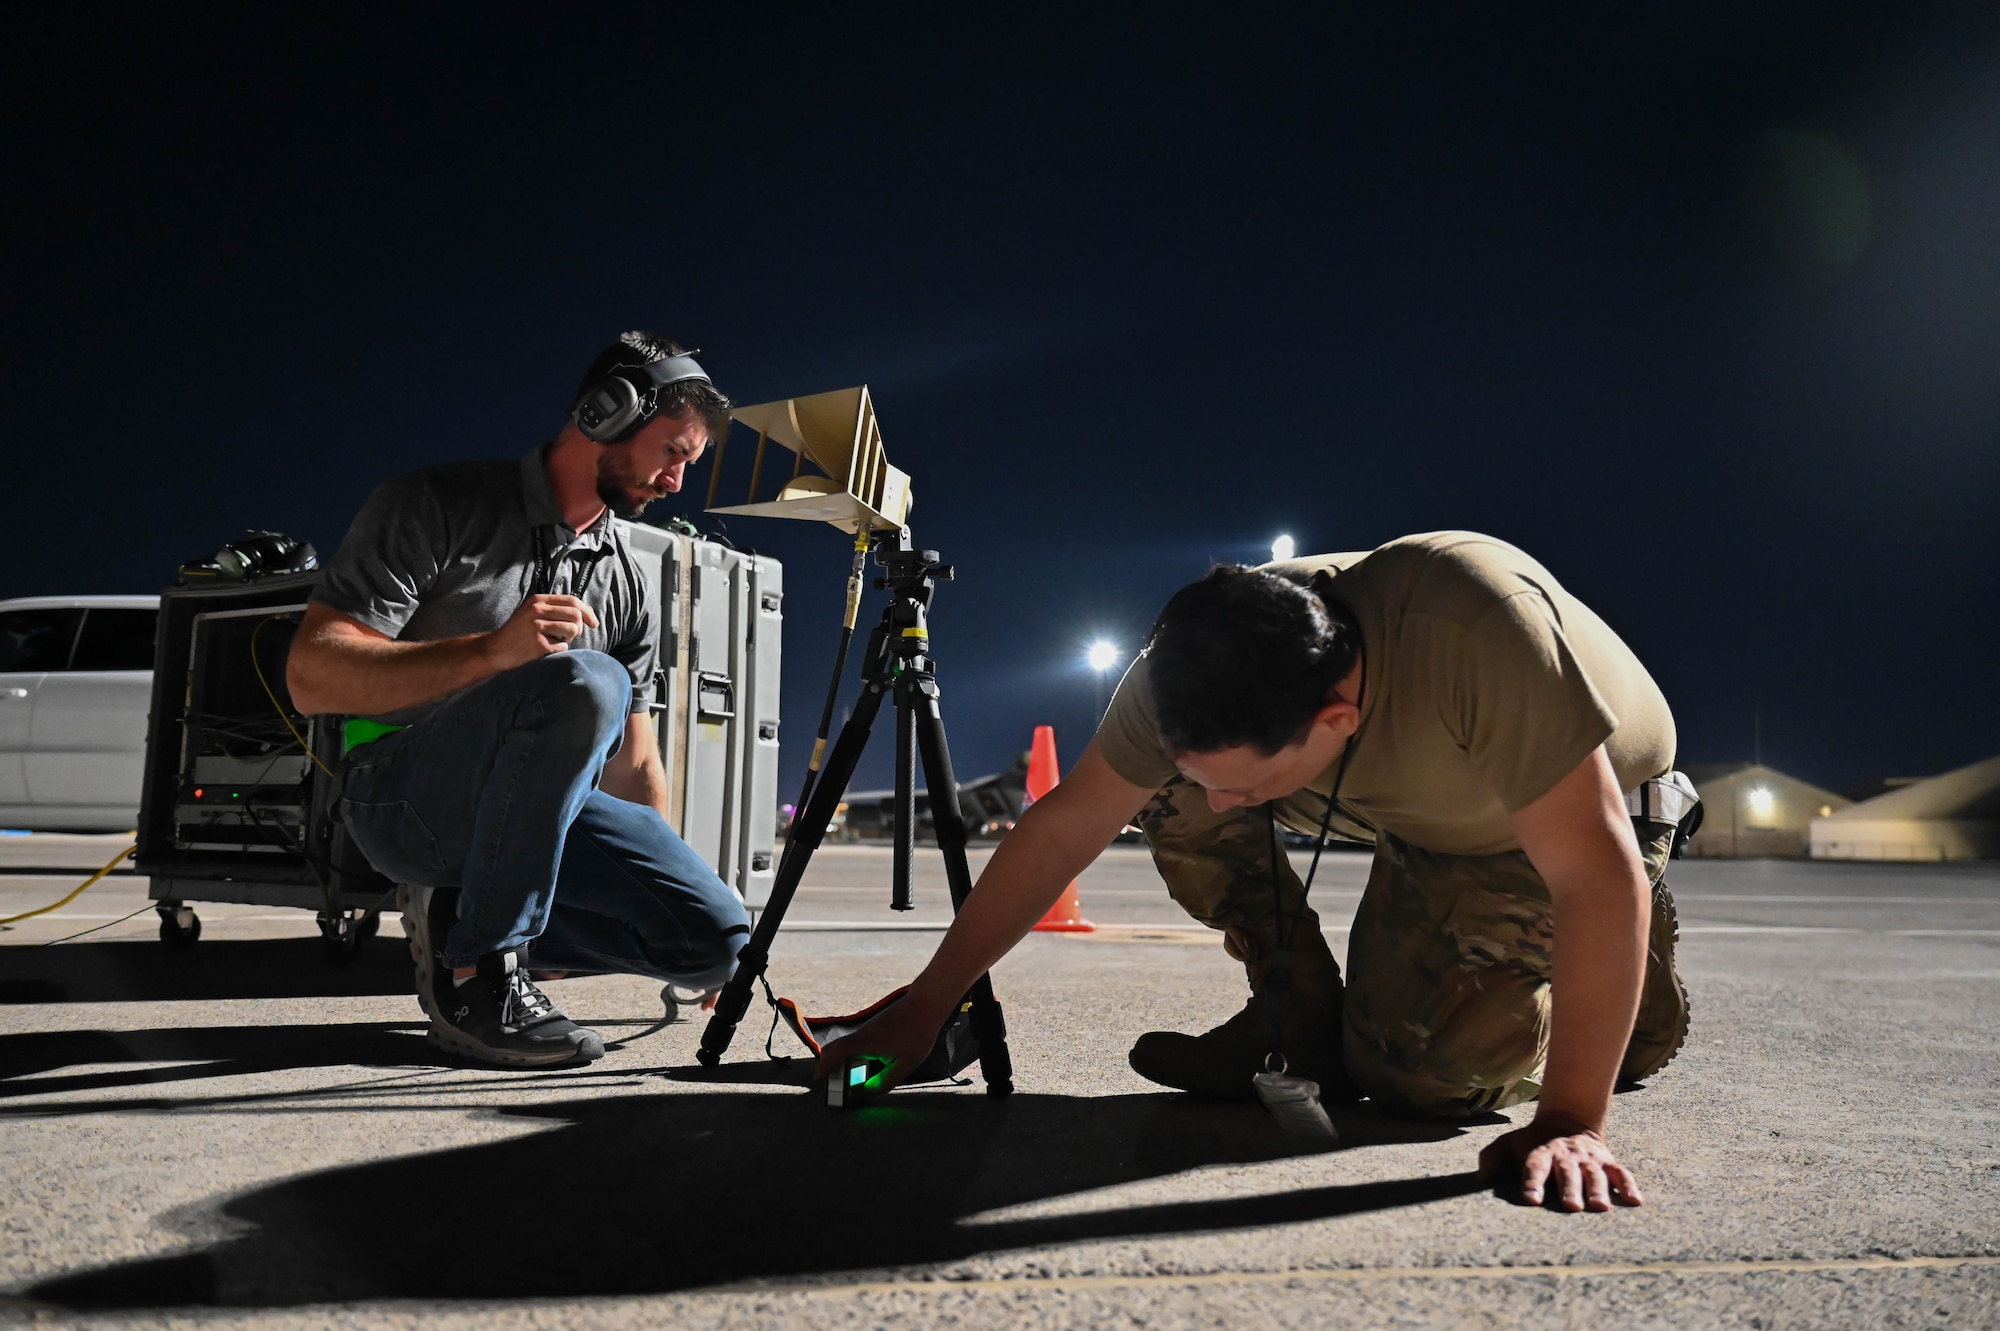 Corey Gaither, 87th Electronic Warfare Squadron COMBAT SHIELD avionics electronic warfare technician, left, and U.S. Air Force Senior Airman Eric Johnson, 87th EWS COMBAT SHIELD avionics electronic warfare journeyman, right, set up a horn agent during a COMBAT SHIELD assessment of aircraft during Red Flag 23-3 at Nellis Air Force Base, Nev., July 14, 2023. The device is used for transmitting radio frequencies that are received and analyzed by the electronic warfare system inside an aircraft. (U.S. Air Force photo by Capt. Benjamin Aronson)